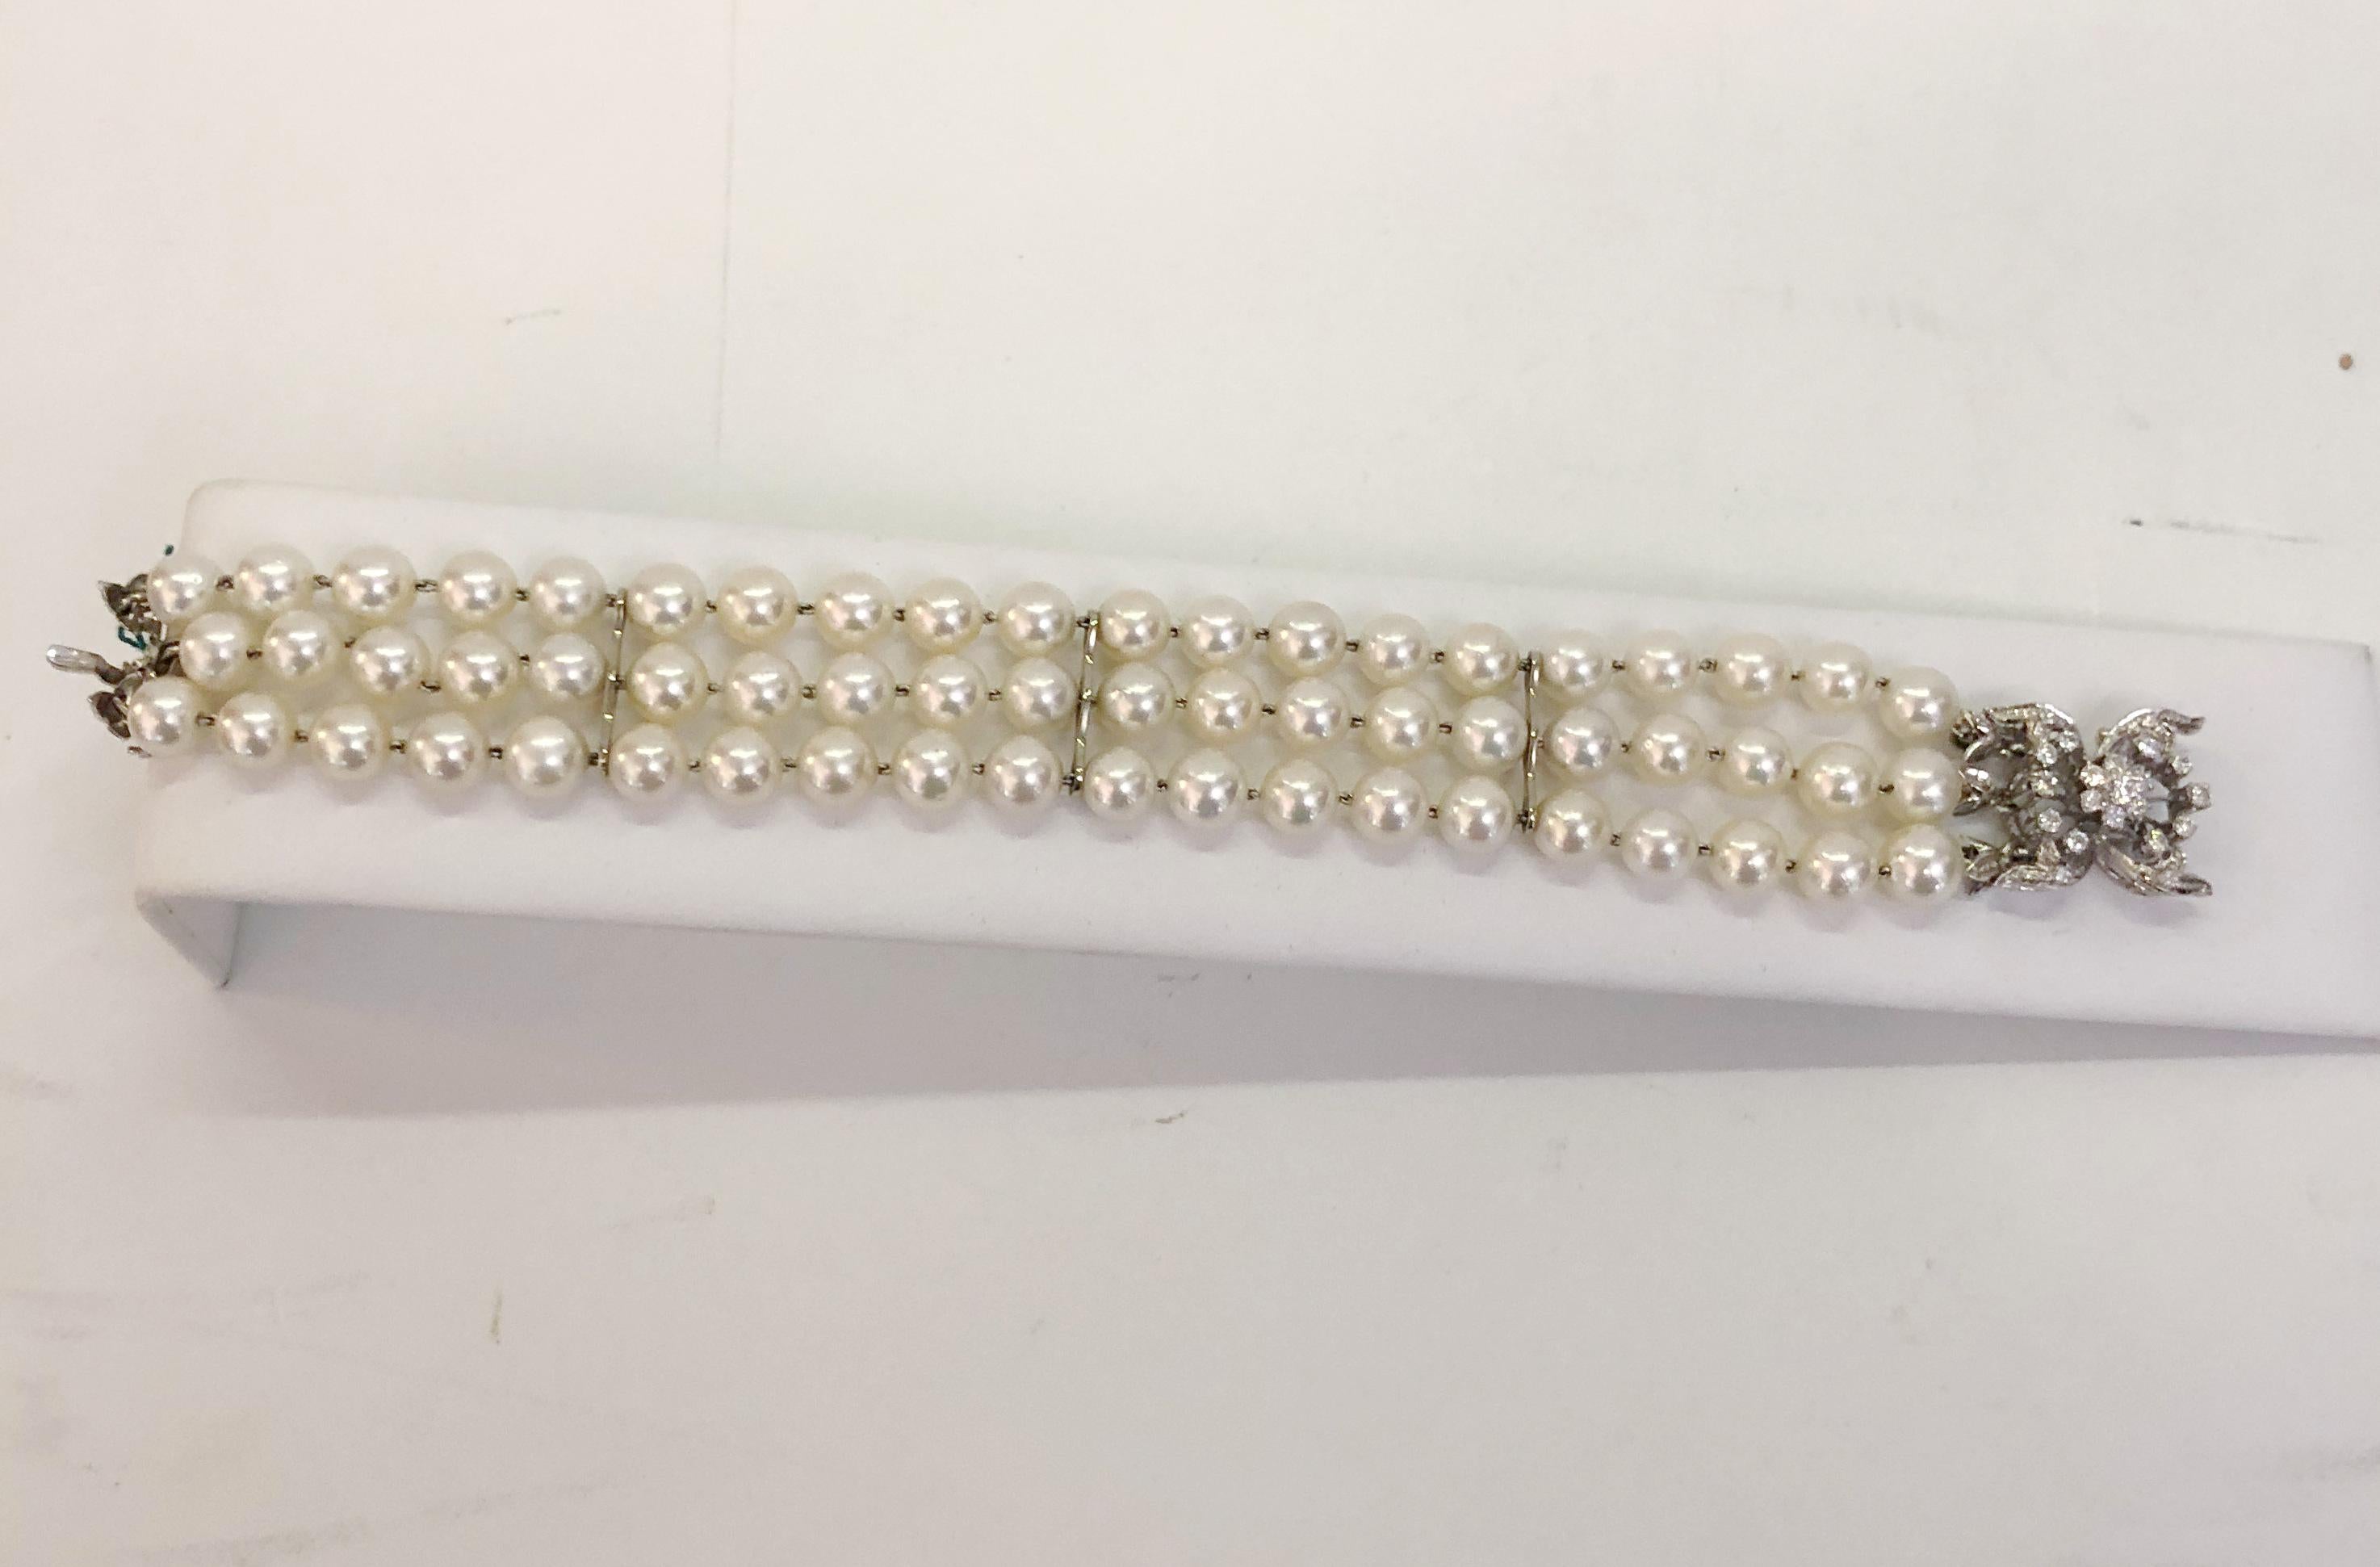 Vintage bracelet with three strands of Japanese pearls tied with 18 karat white gold, with a clasp also in white gold and 0.4 karats of diamonds / Made in Italy 1950s
Length 18cm